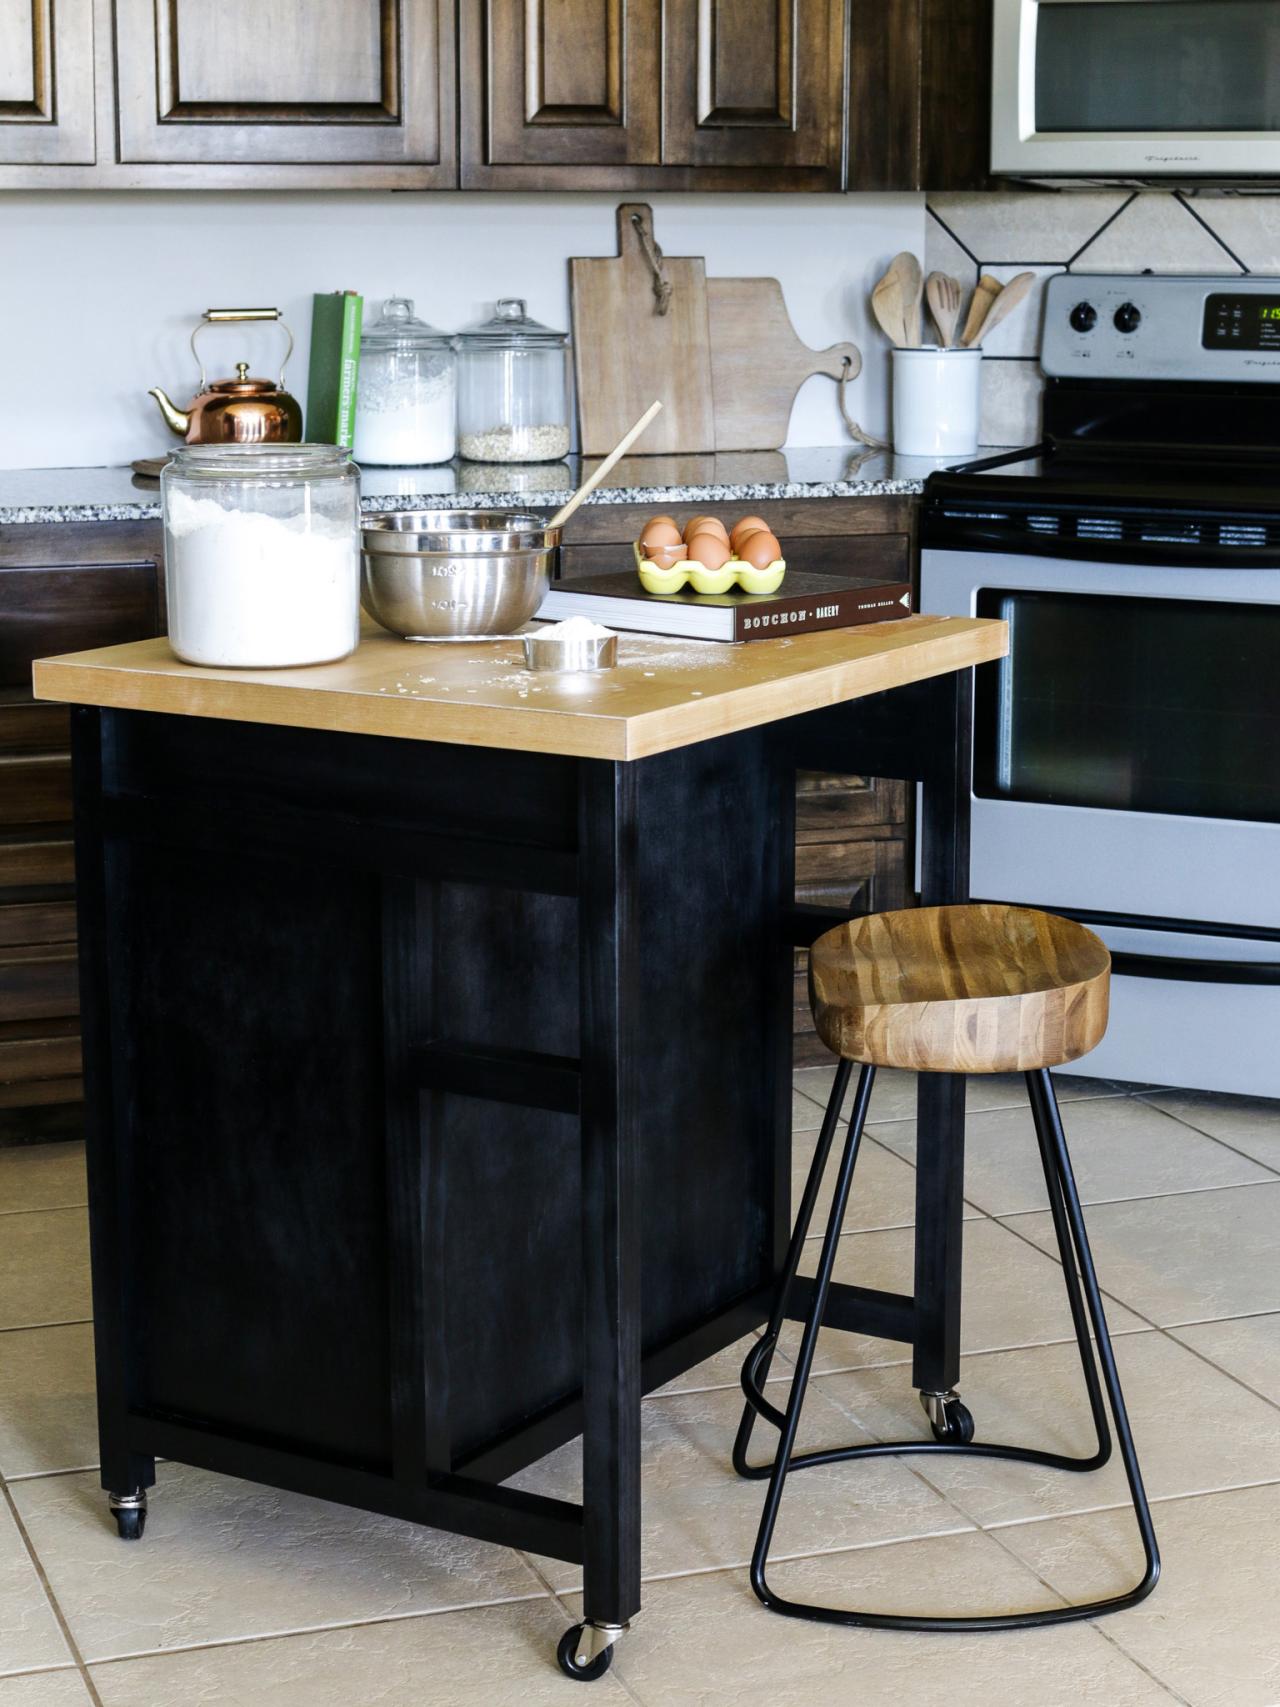 Build A Diy Kitchen Island On Wheels, How To Build A Kitchen Island On Wheels